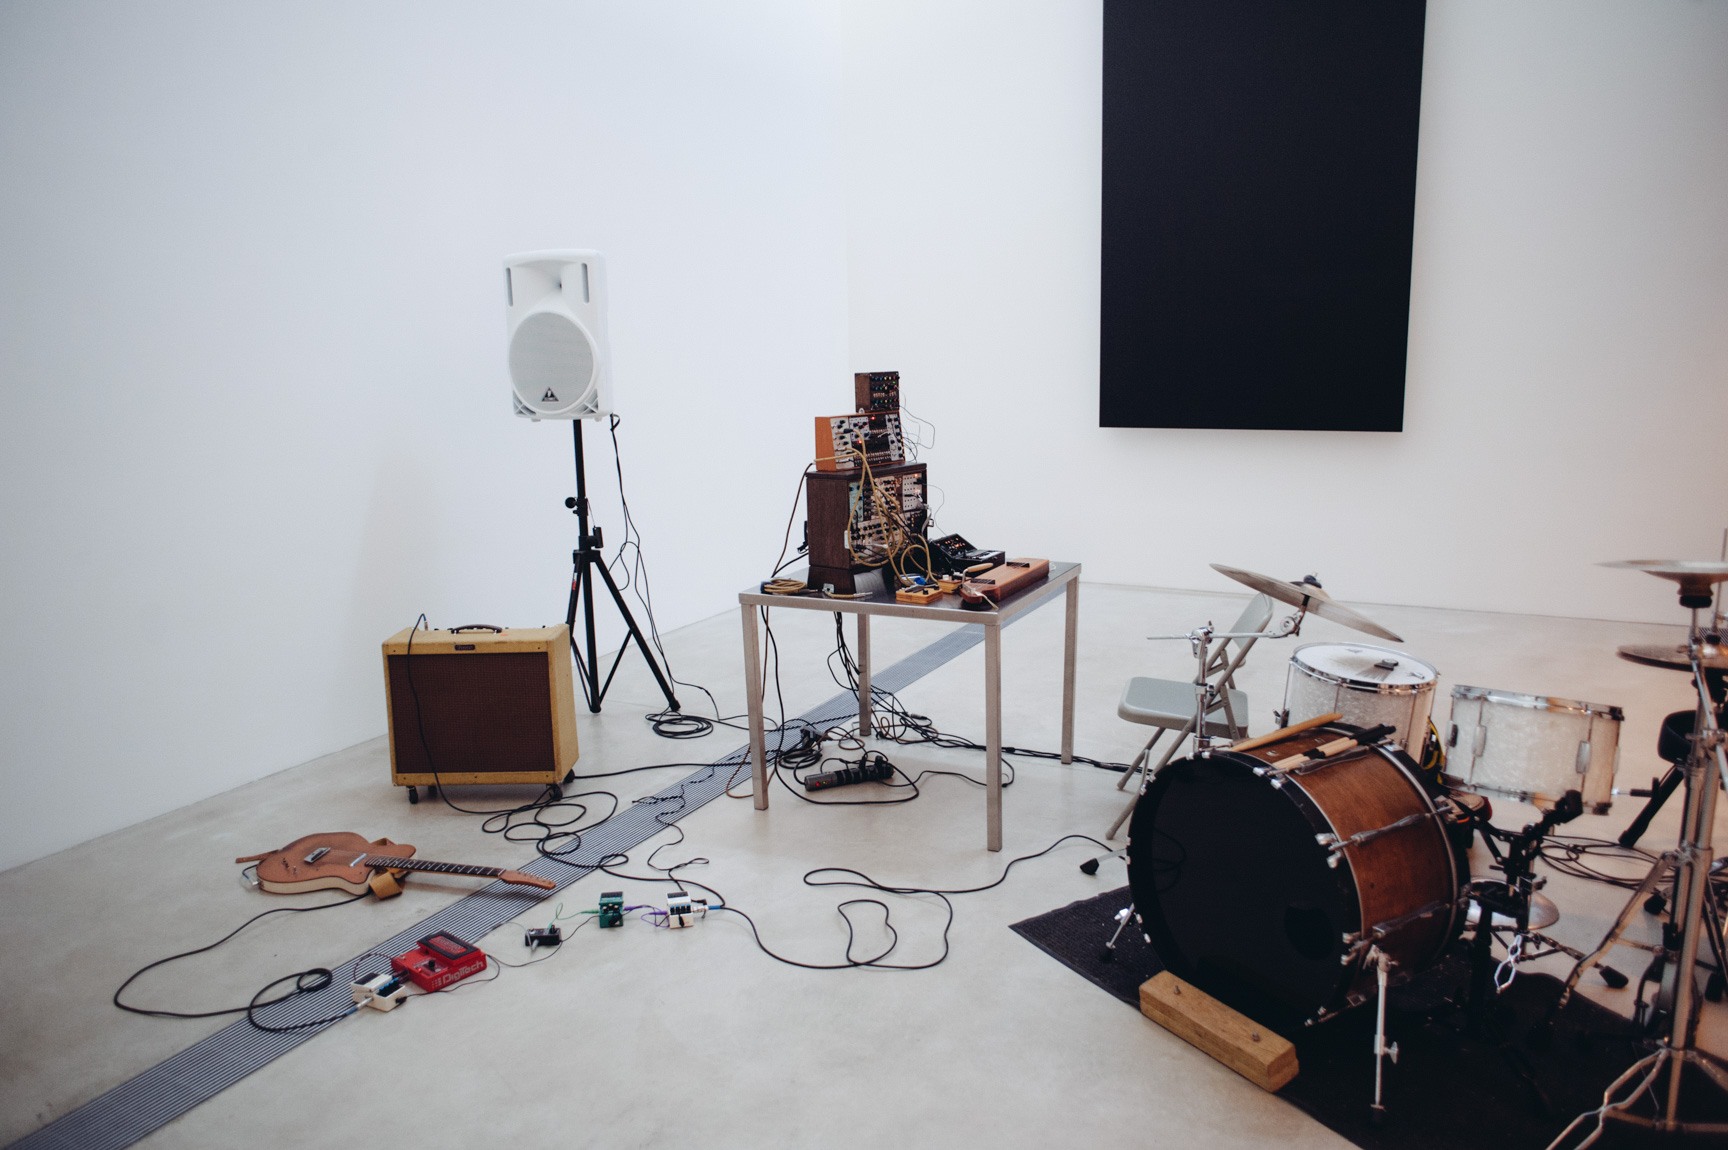 A view of the musician's instruments in front of Kelly's "Blue Black," including a drum set, a guitar, and a homemade synthesizer.